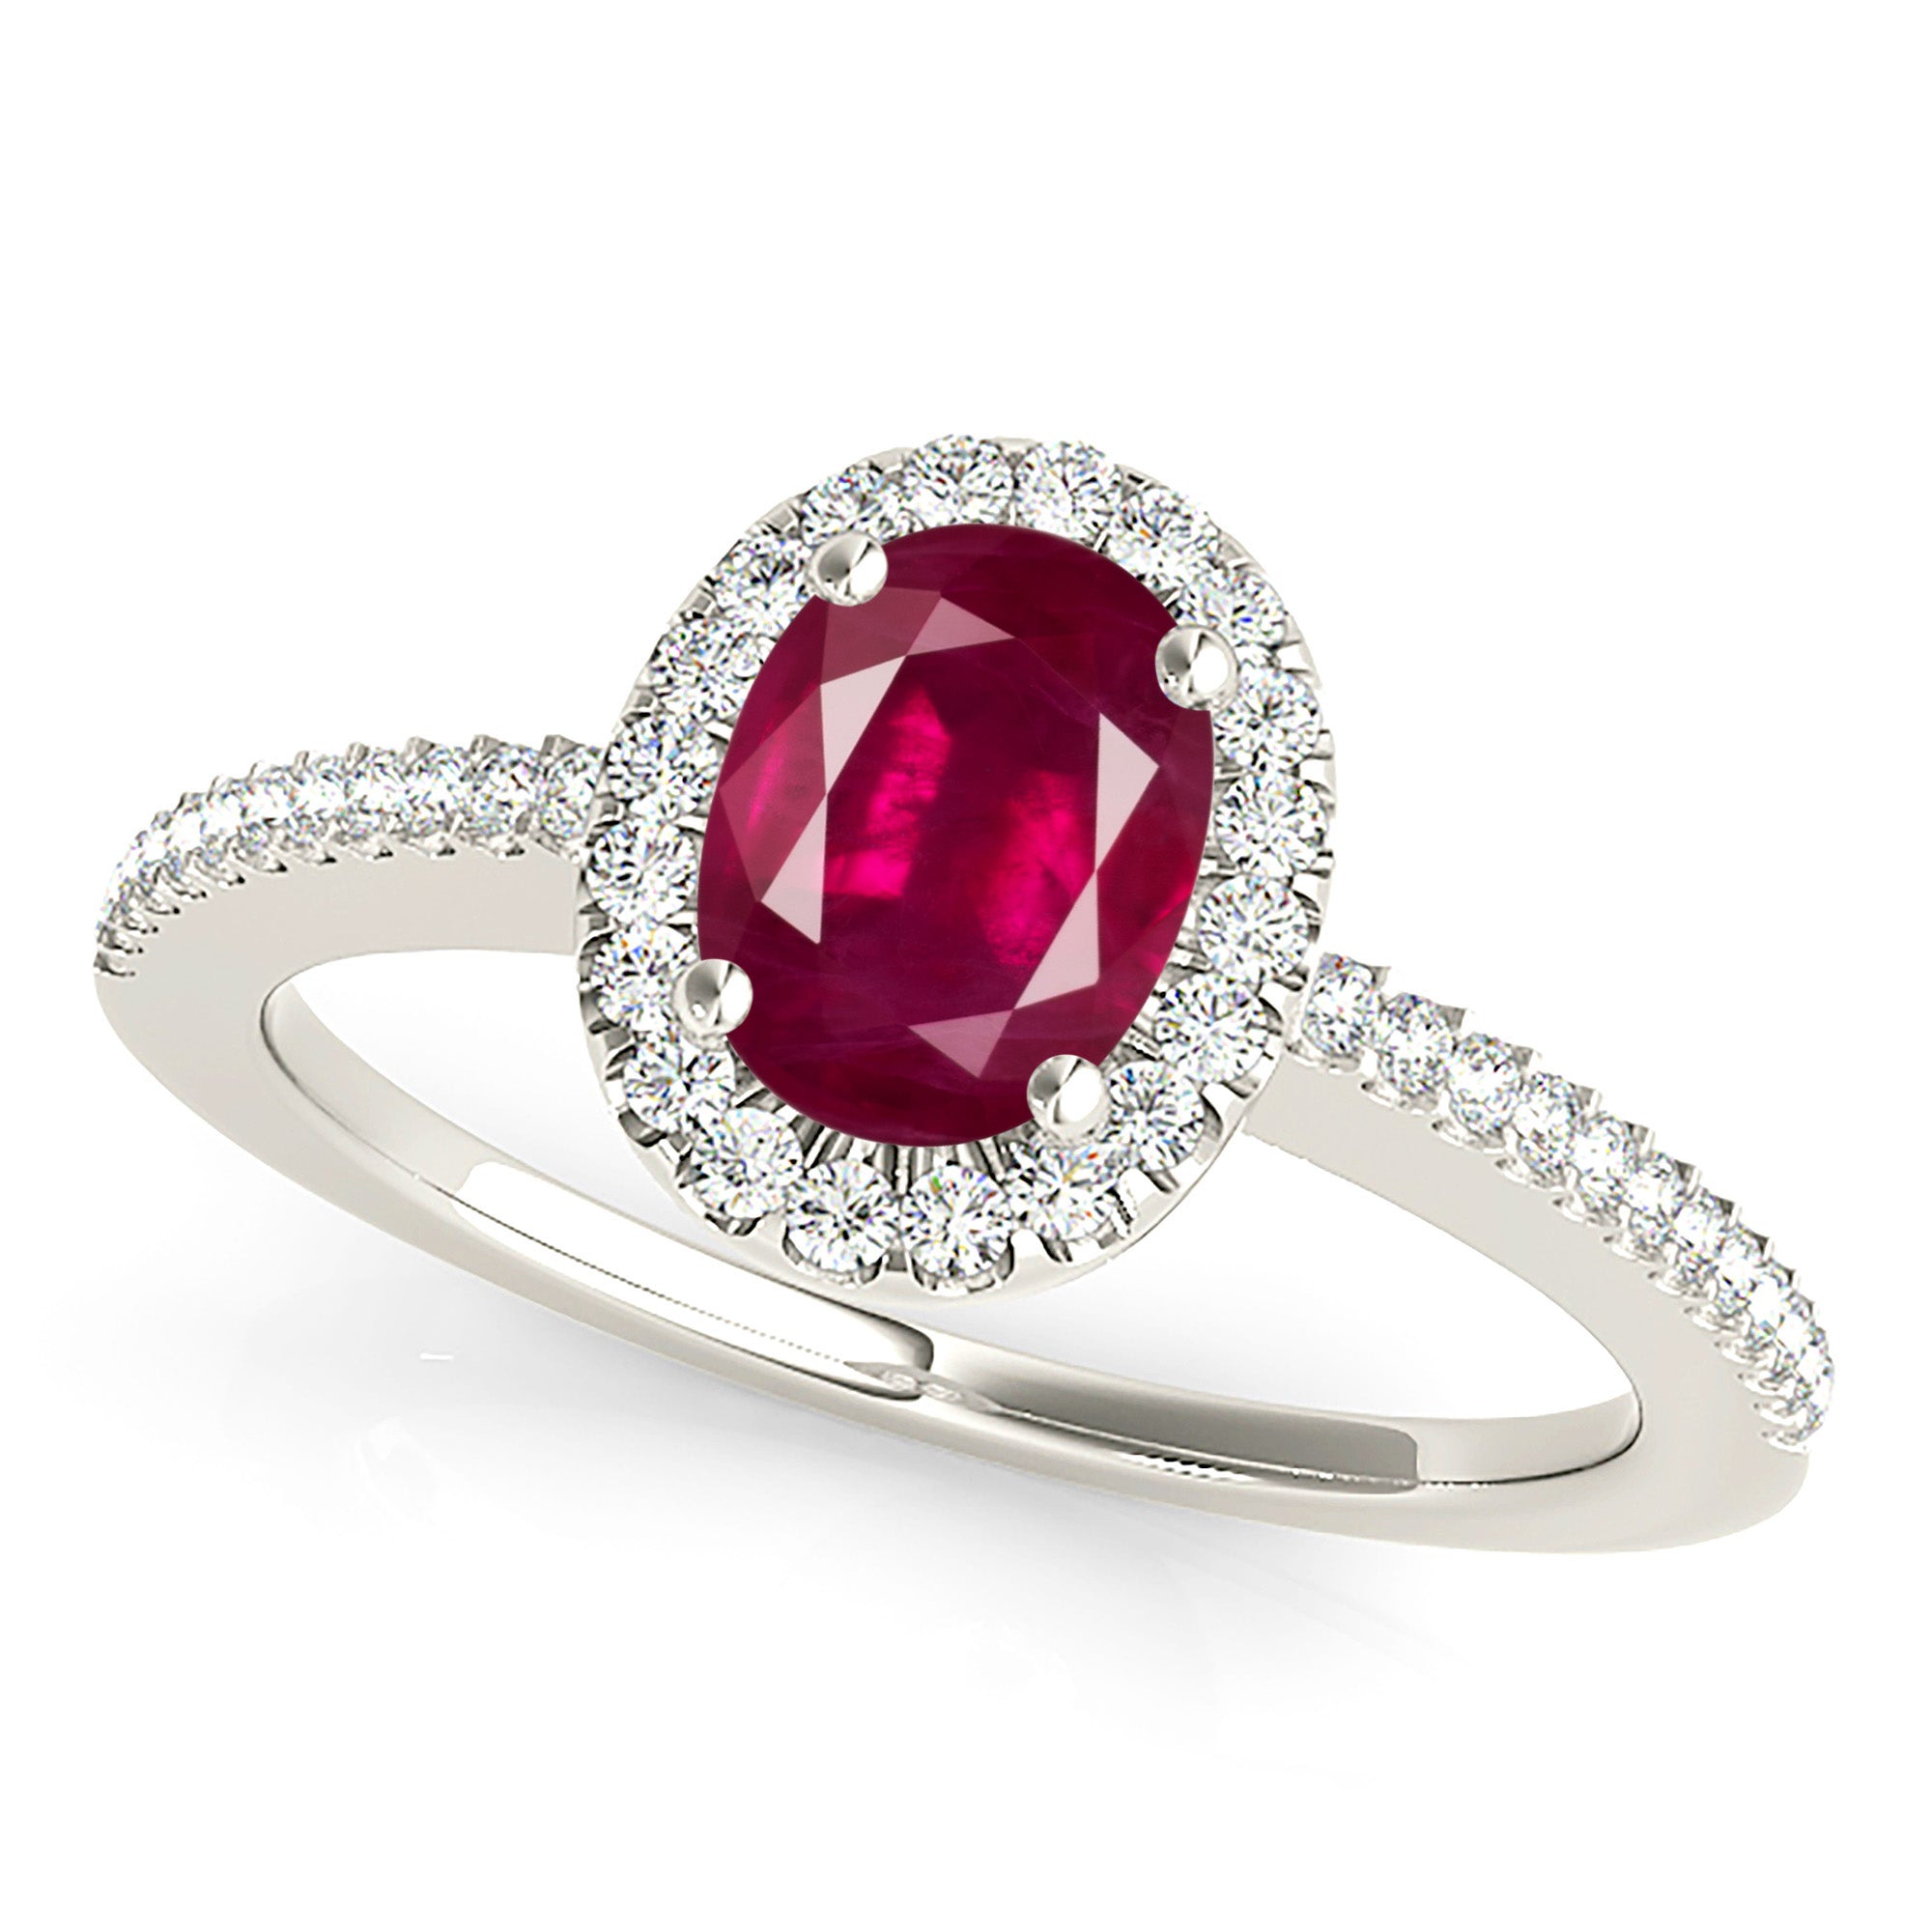 1.00 ct. Genuine Oval Ruby Ring With 0.20 ctw. Diamond Halo And Delicate Diamond Band-in 14K/18K White, Yellow, Rose Gold and Platinum - Christmas Jewelry Gift -VIRABYANI